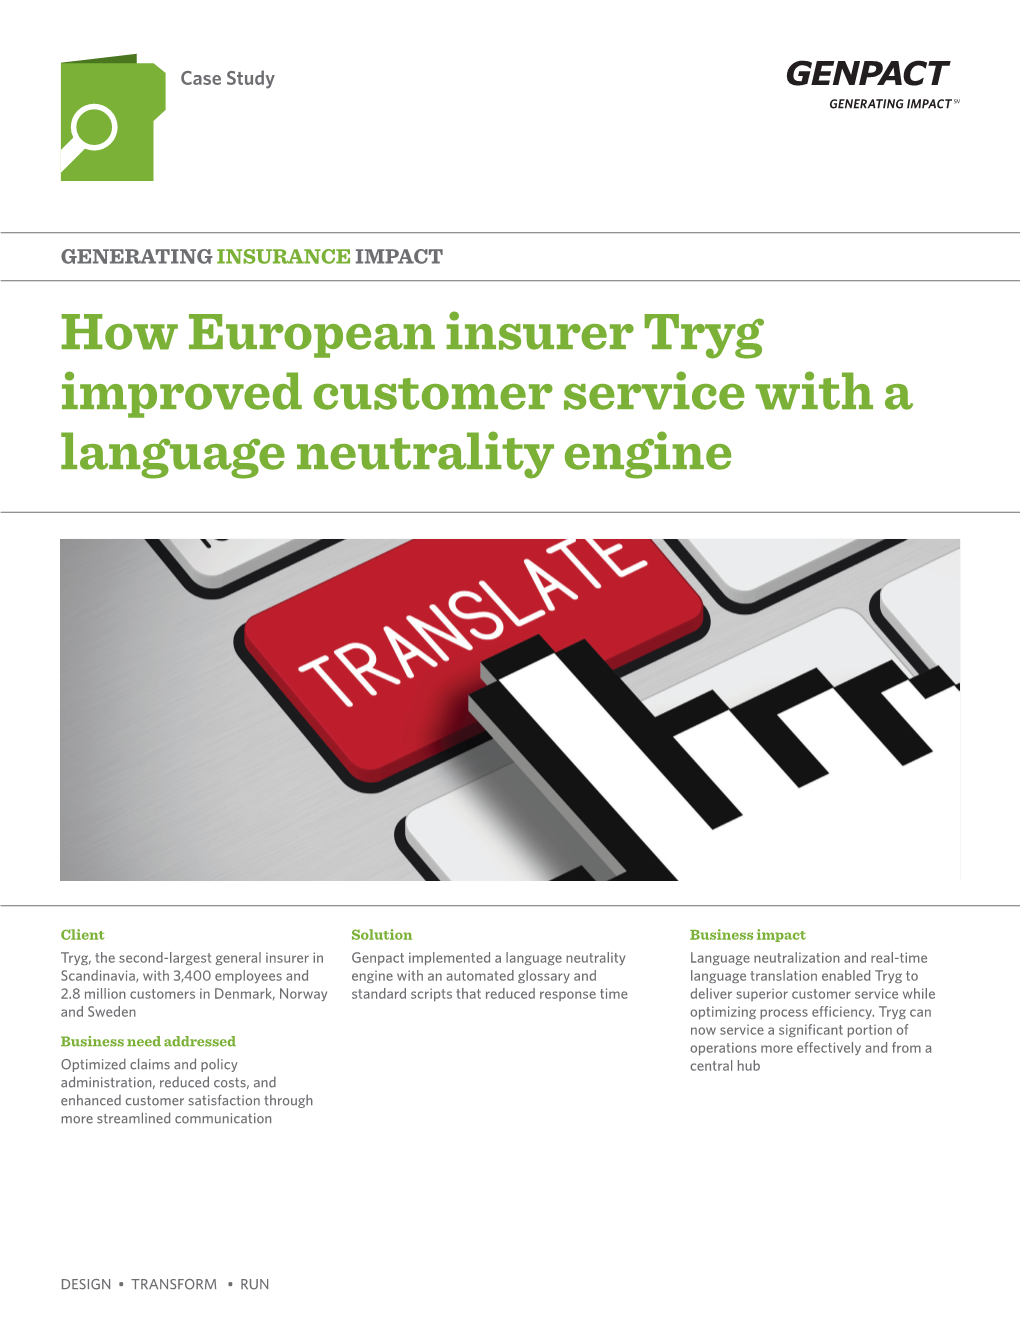 How European Insurer Tryg Improved Customer Service with a Language Neutrality Engine